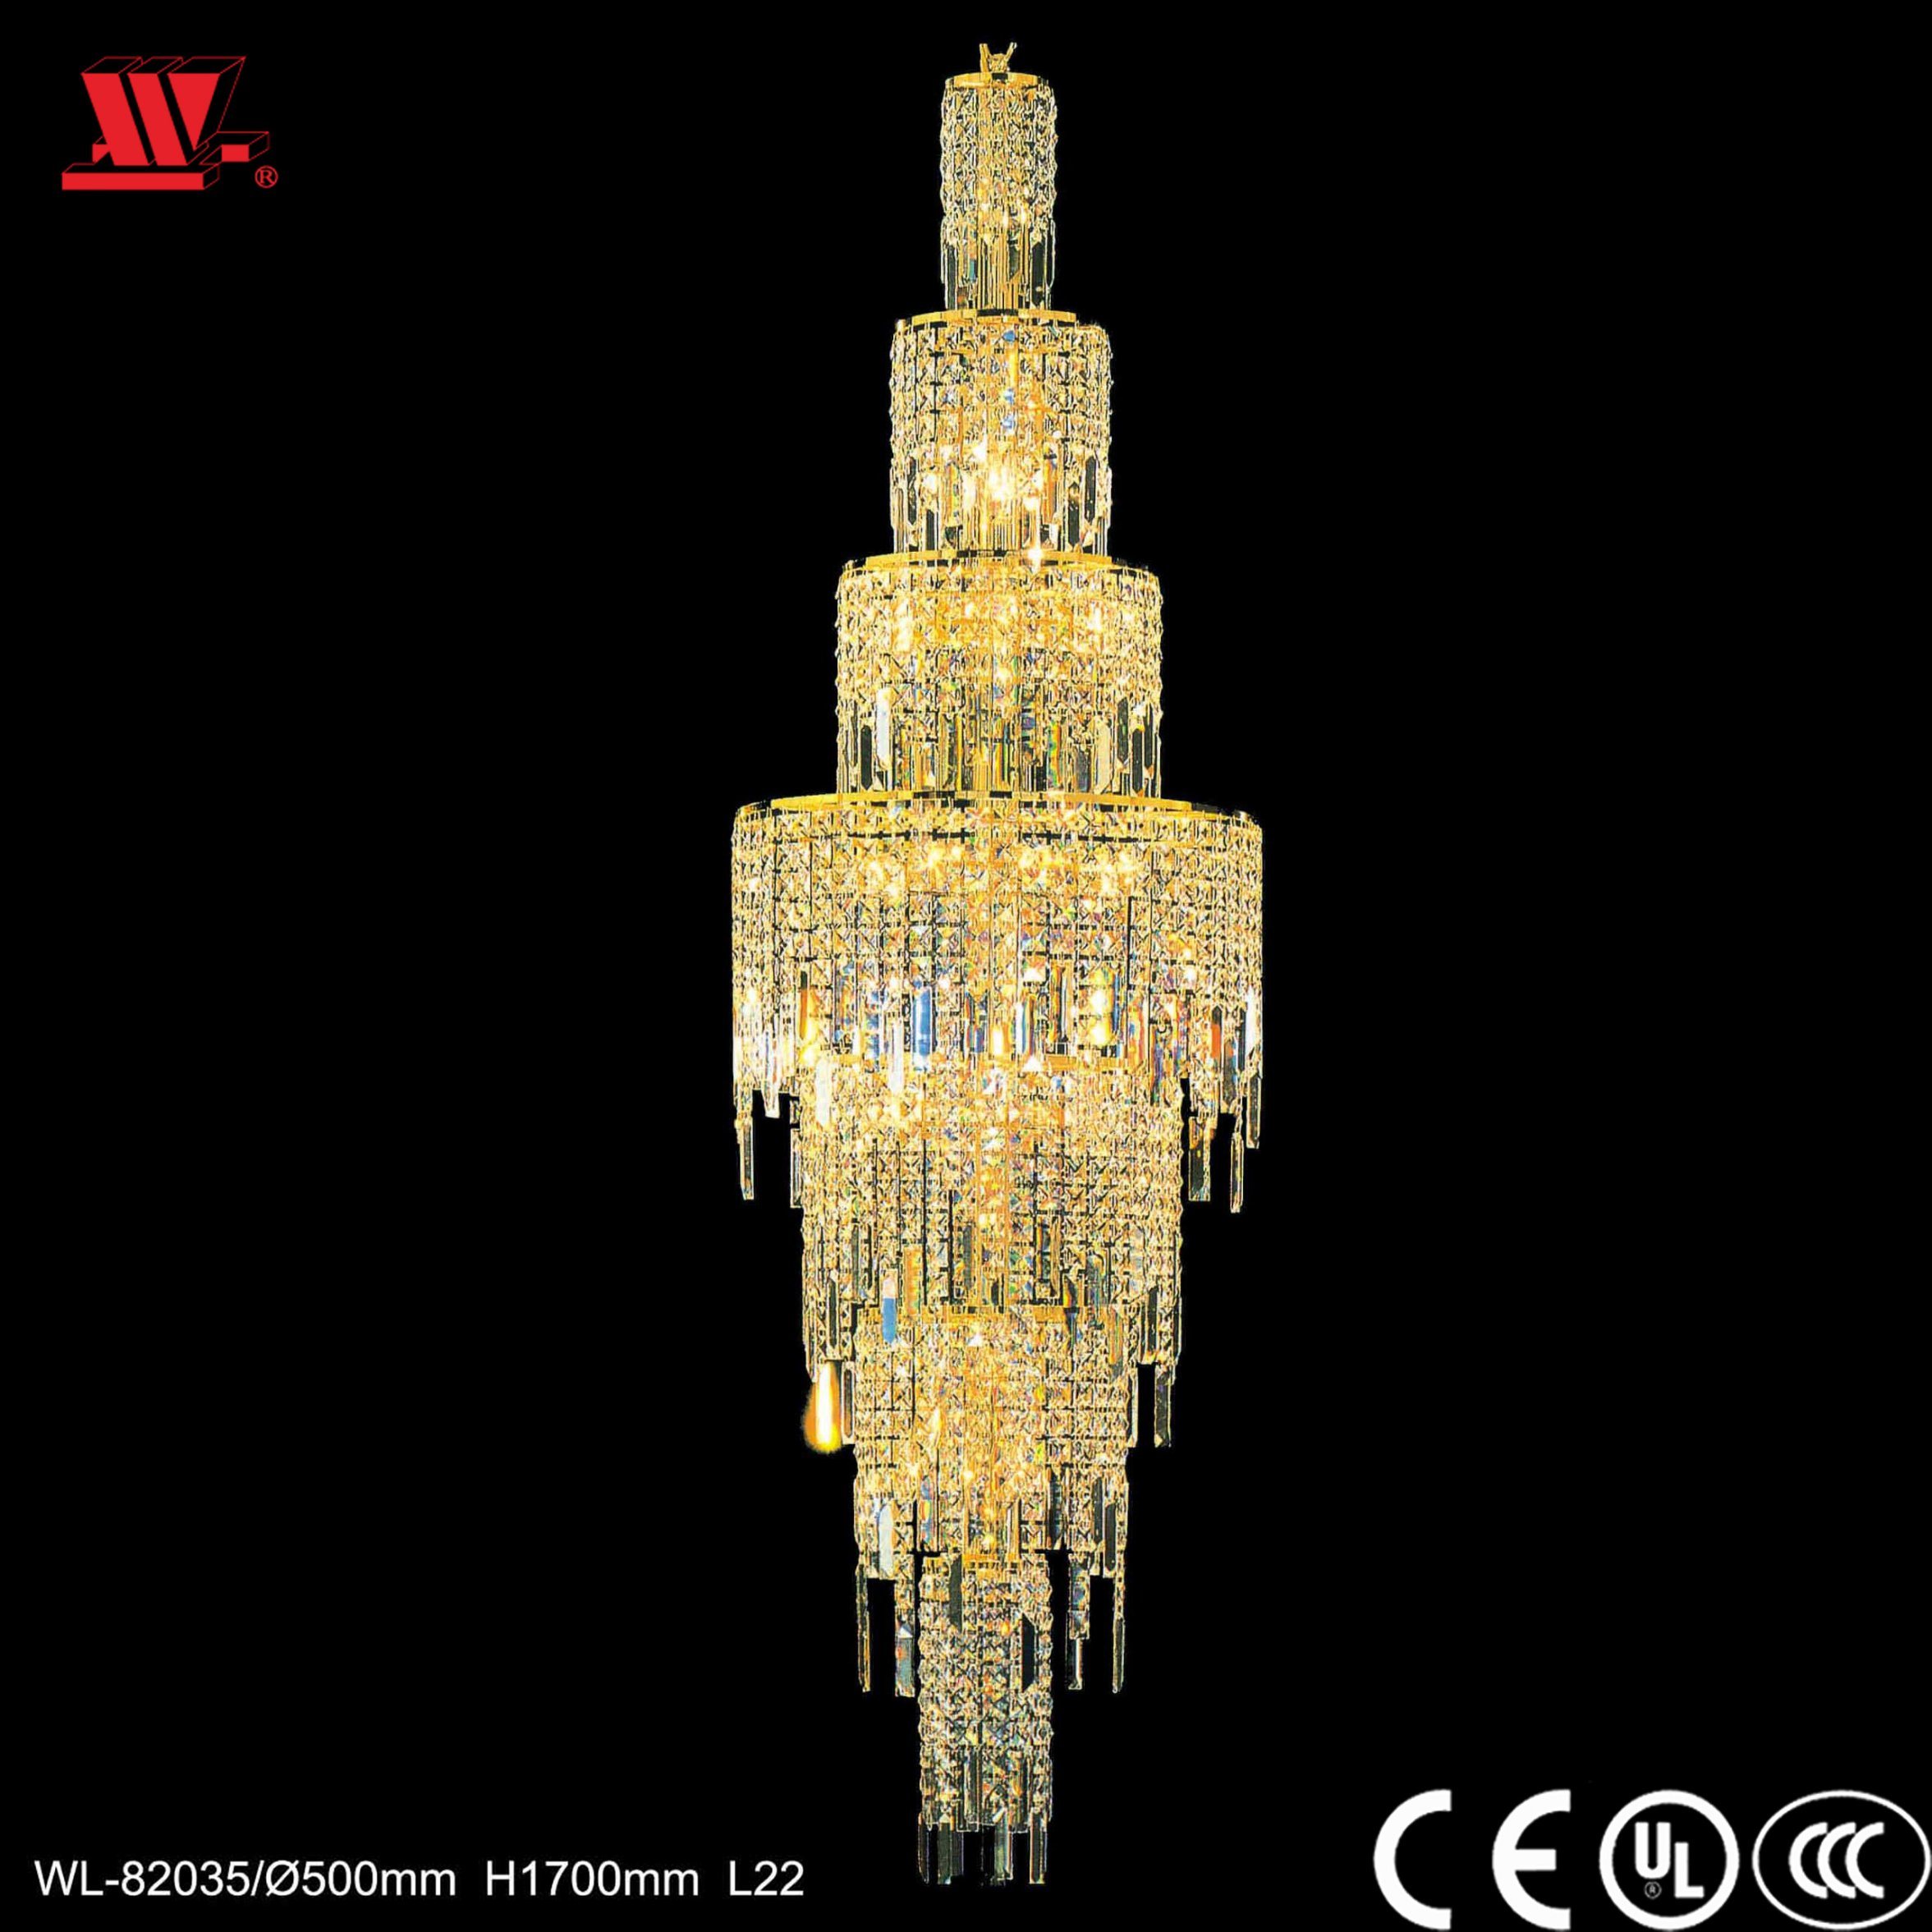 Crystal Chandelier with Glass Chains Wl-82035